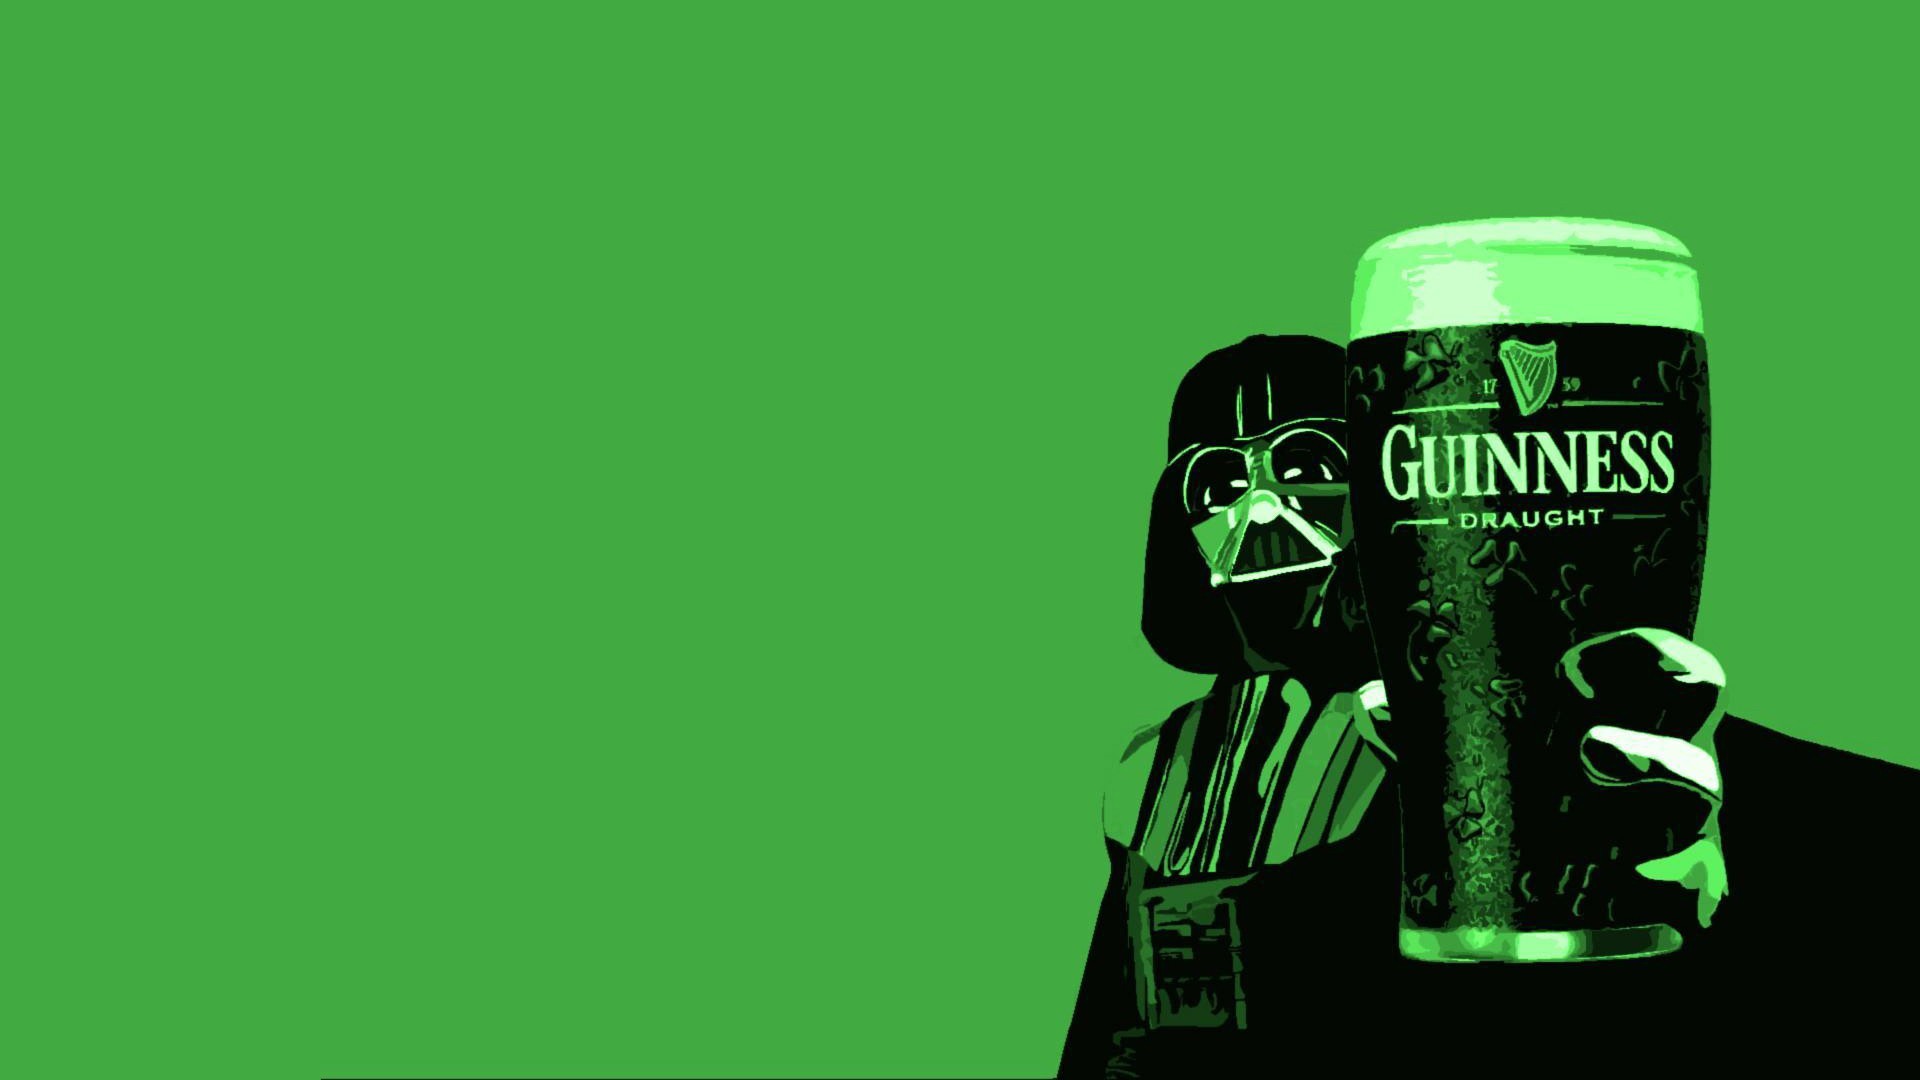 General 1920x1080 humor Star Wars beer Guinness Darth Vader Star Wars Humor green background Star Wars Villains logo drinking glass simple background